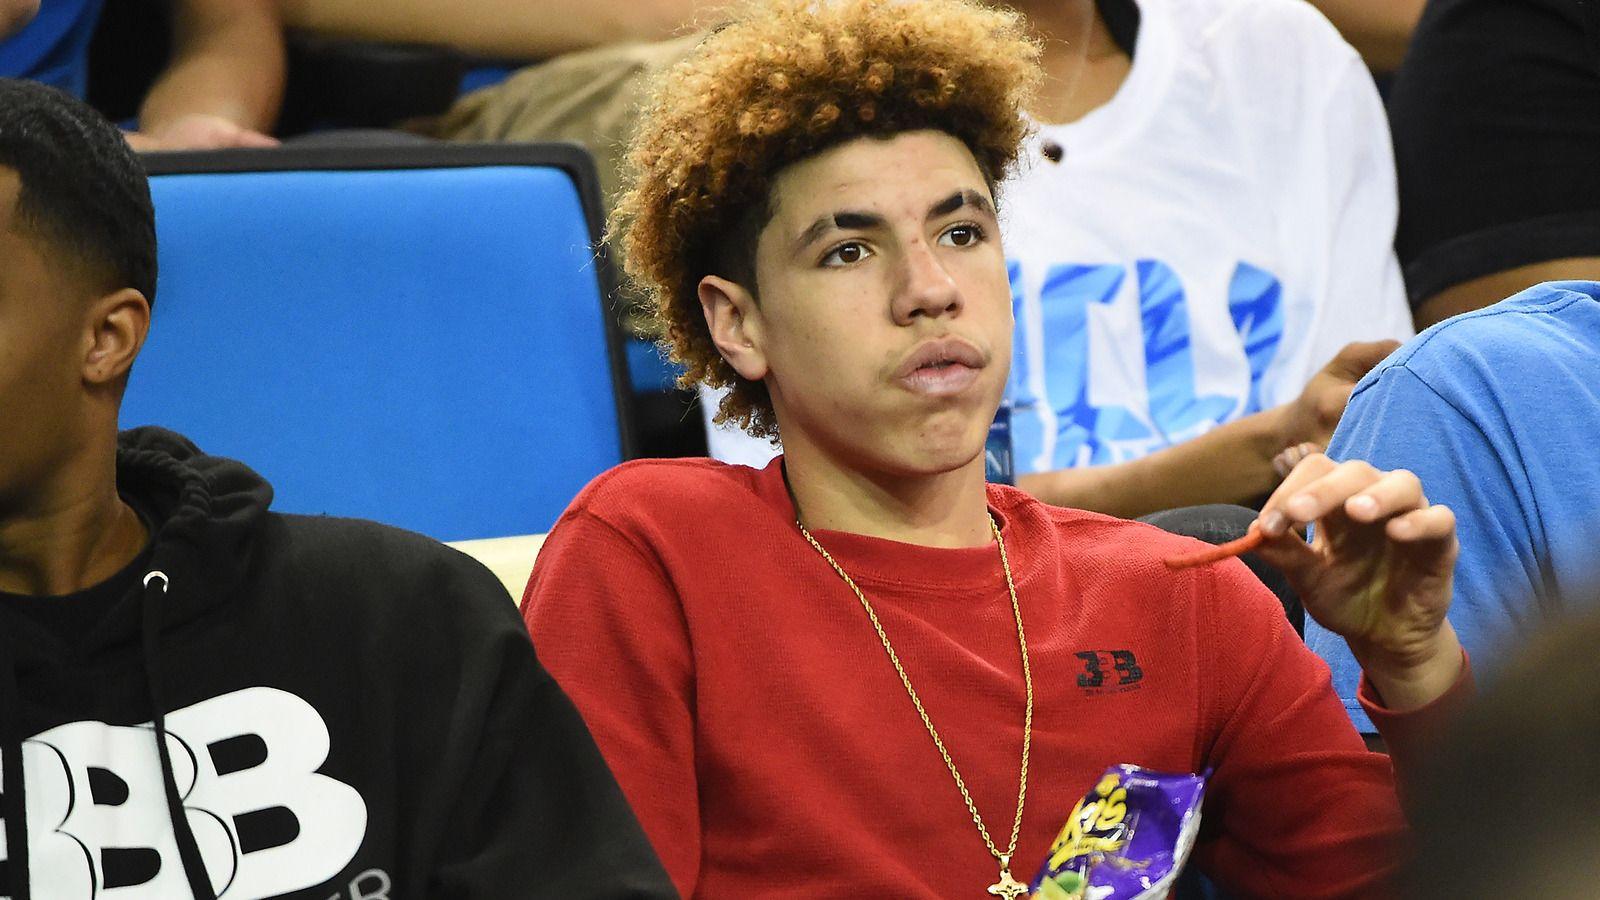 WWE comments on LaMelo Ball using racial slur during 'Raw'